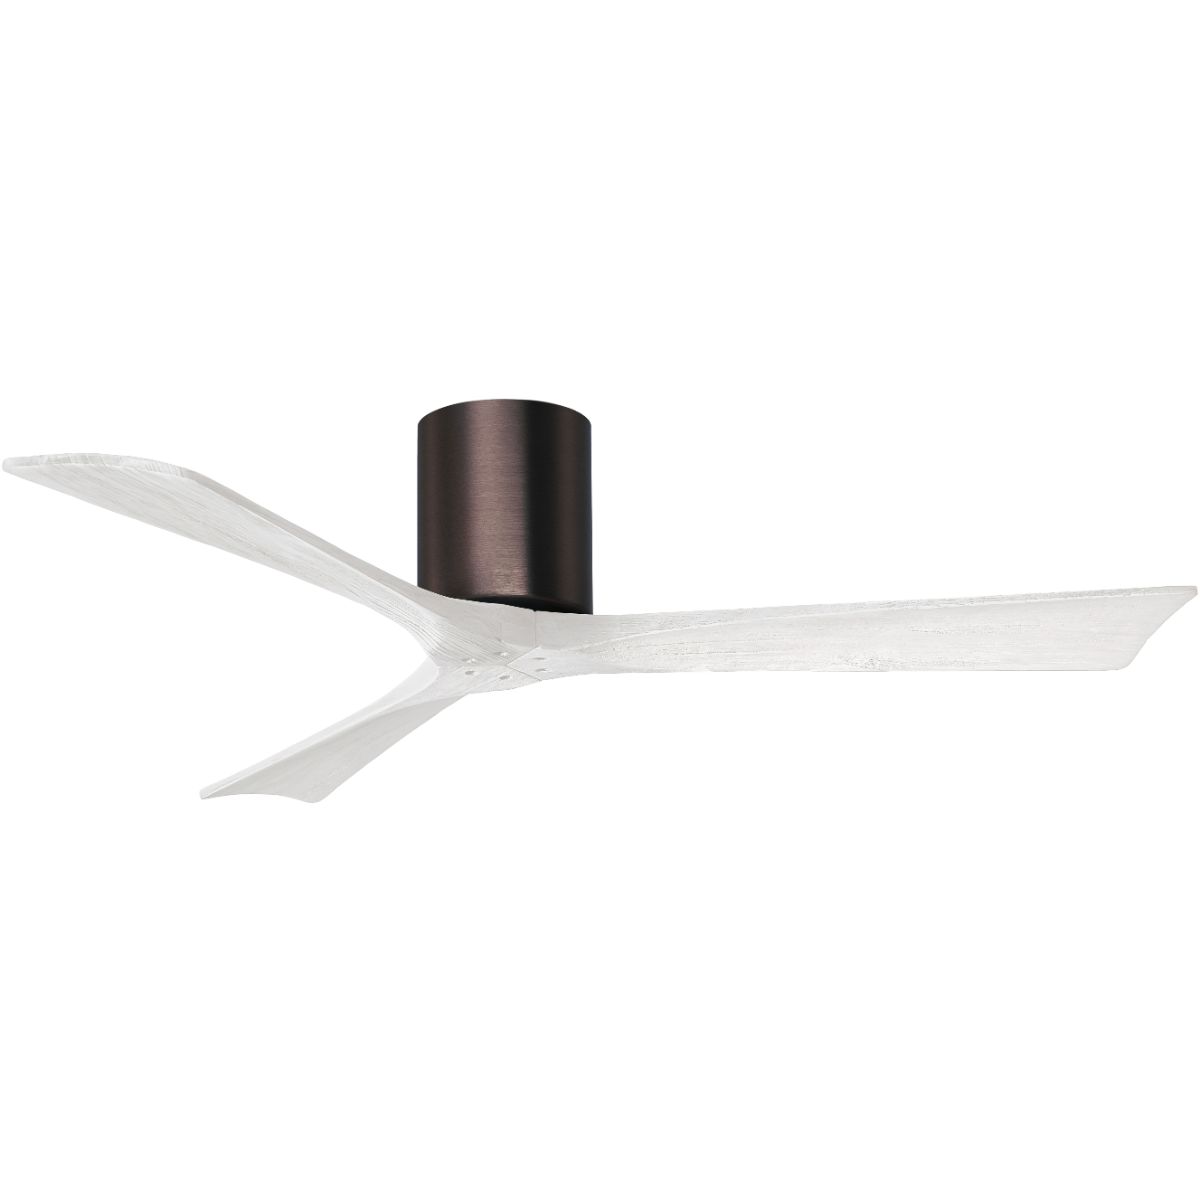 Irene 52 Inch Low Profile Outdoor Ceiling Fan With Remote And Wall Control, Brushed Bronze with Matte White Blades